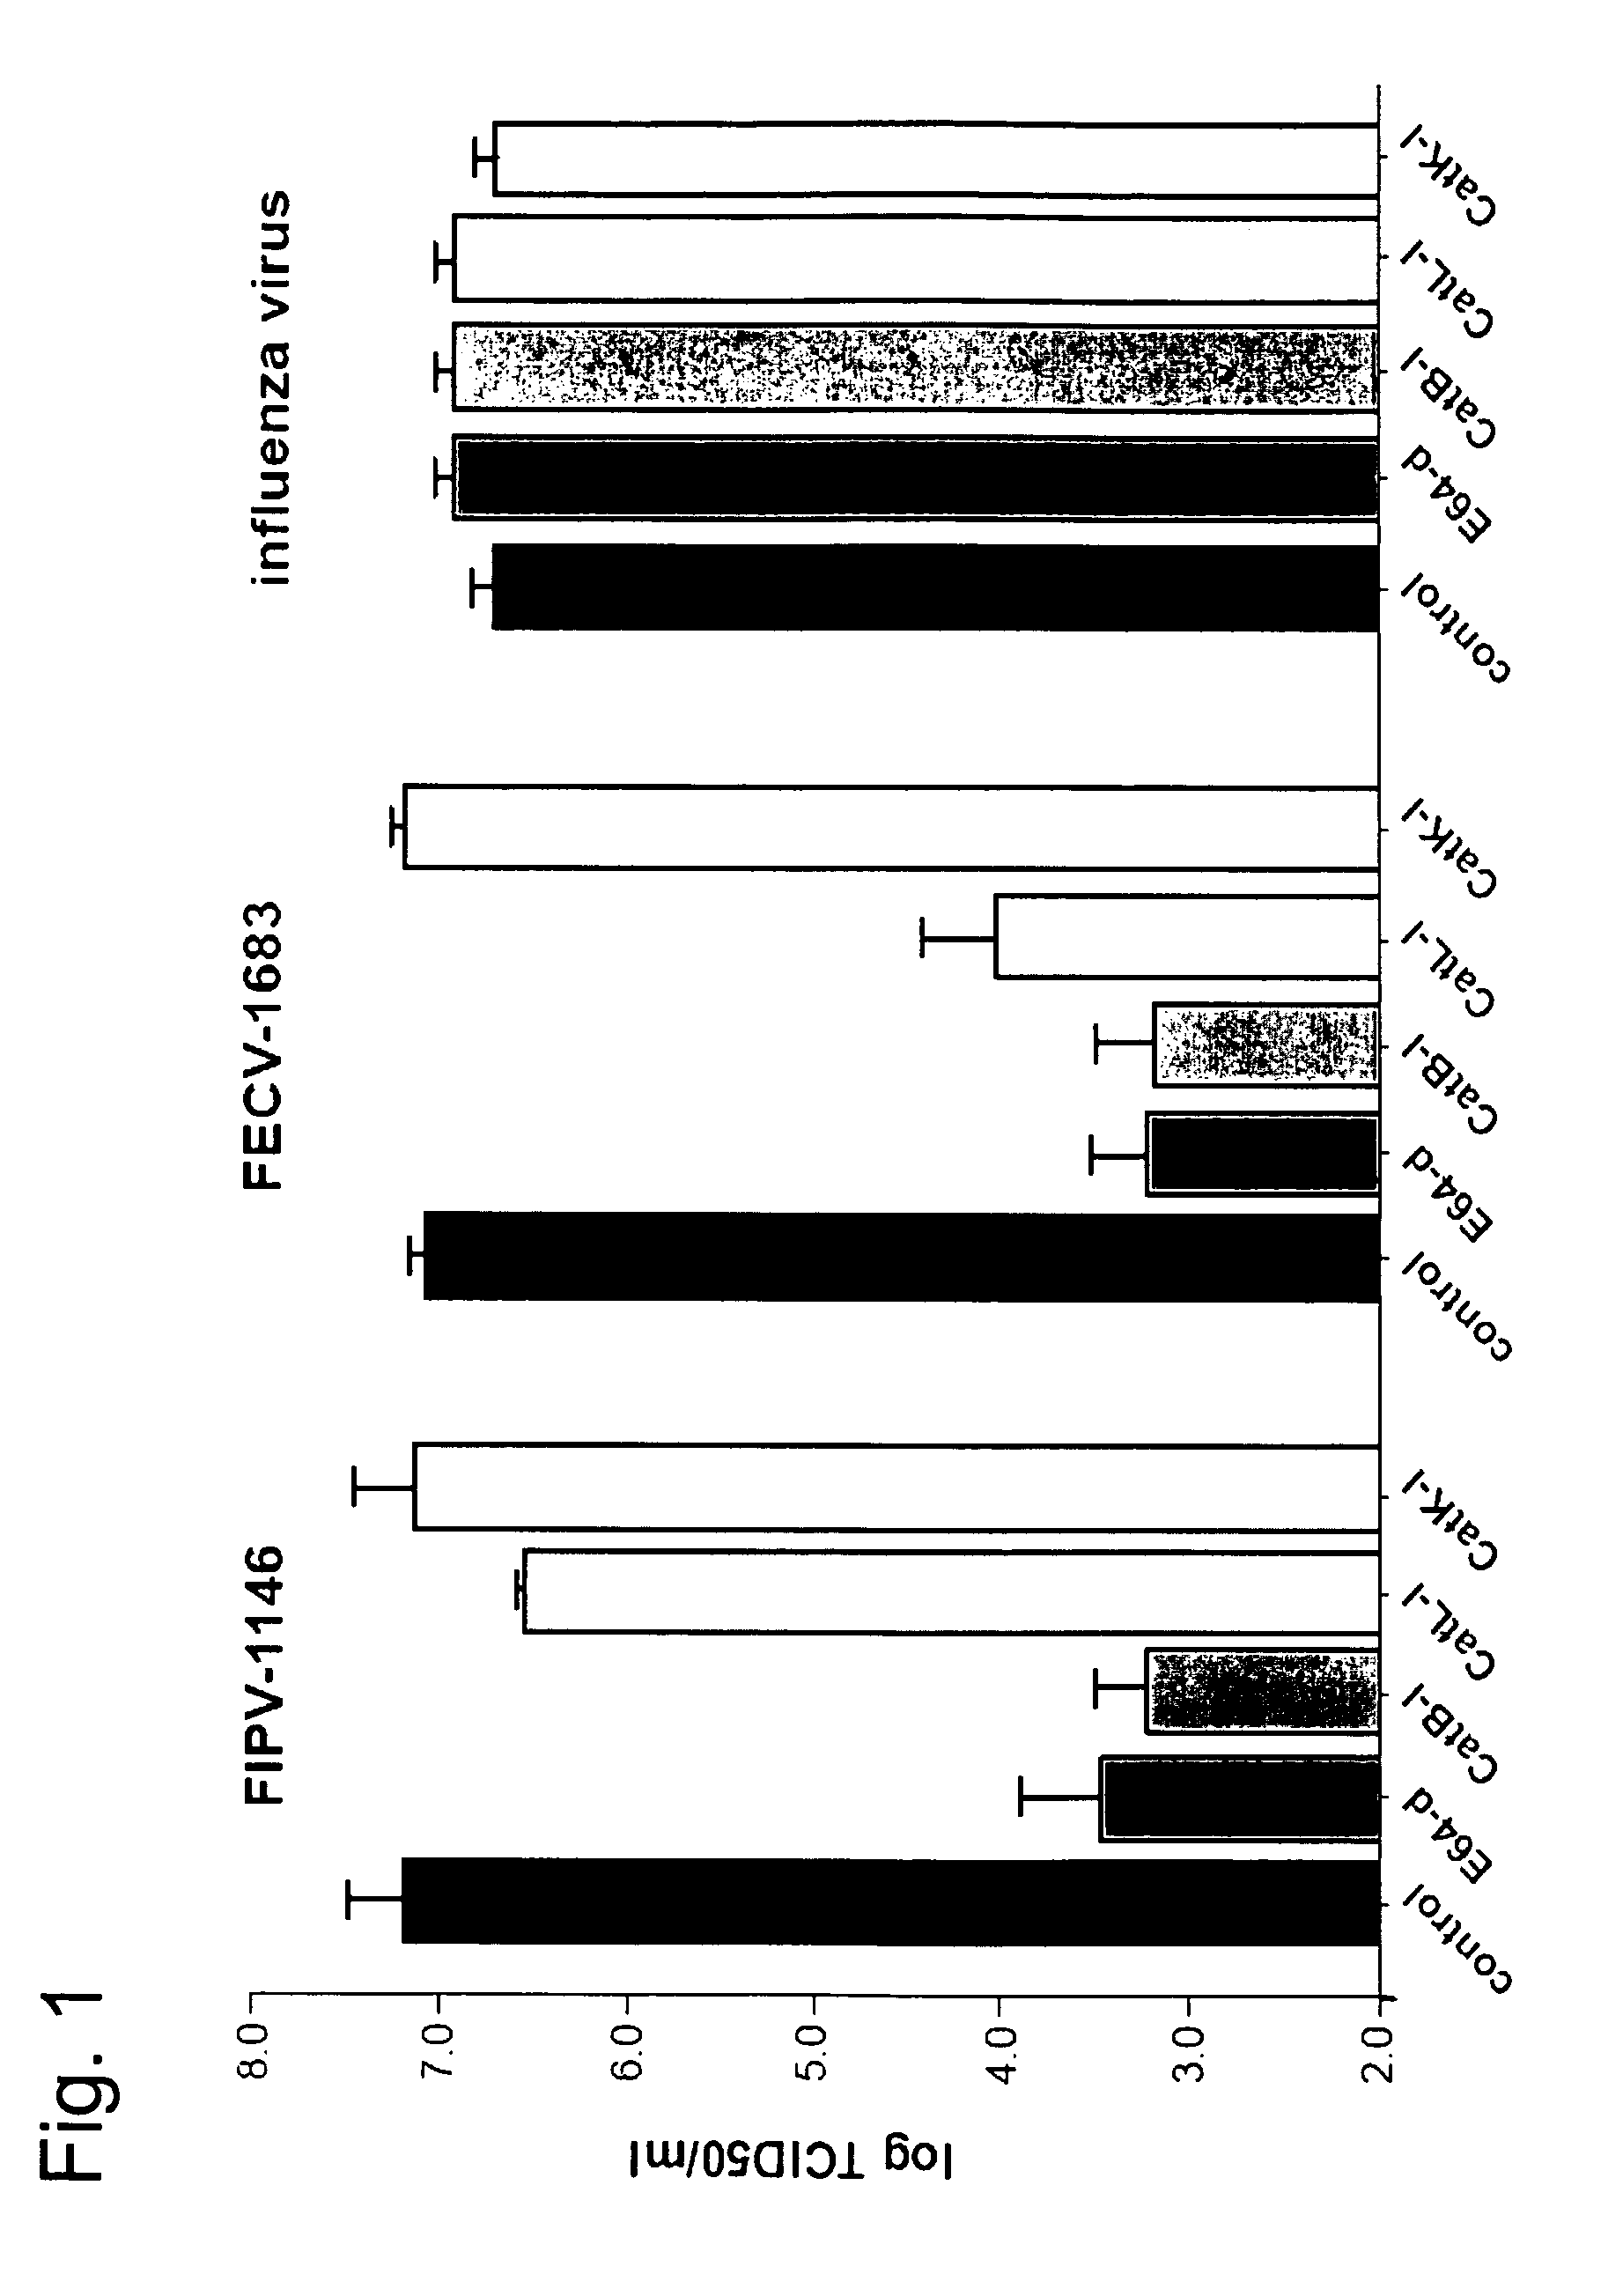 Method for prophylaxis or treatment of feline infectious peritonitis